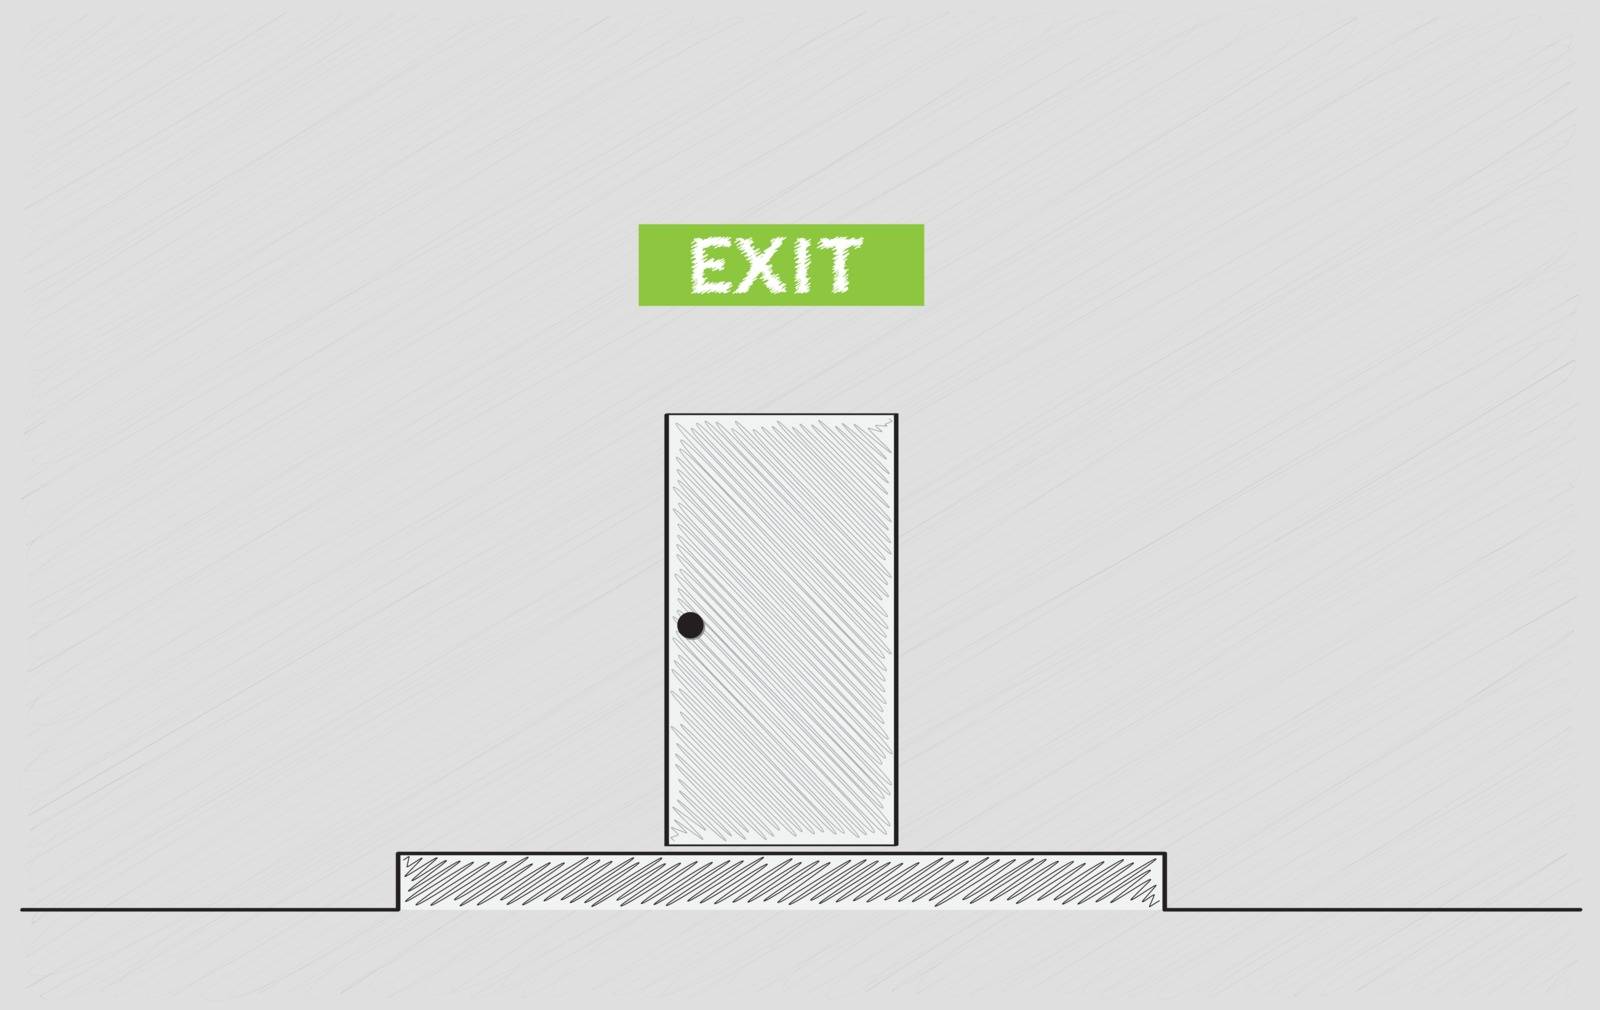 exit text and closed door, crosshatched image